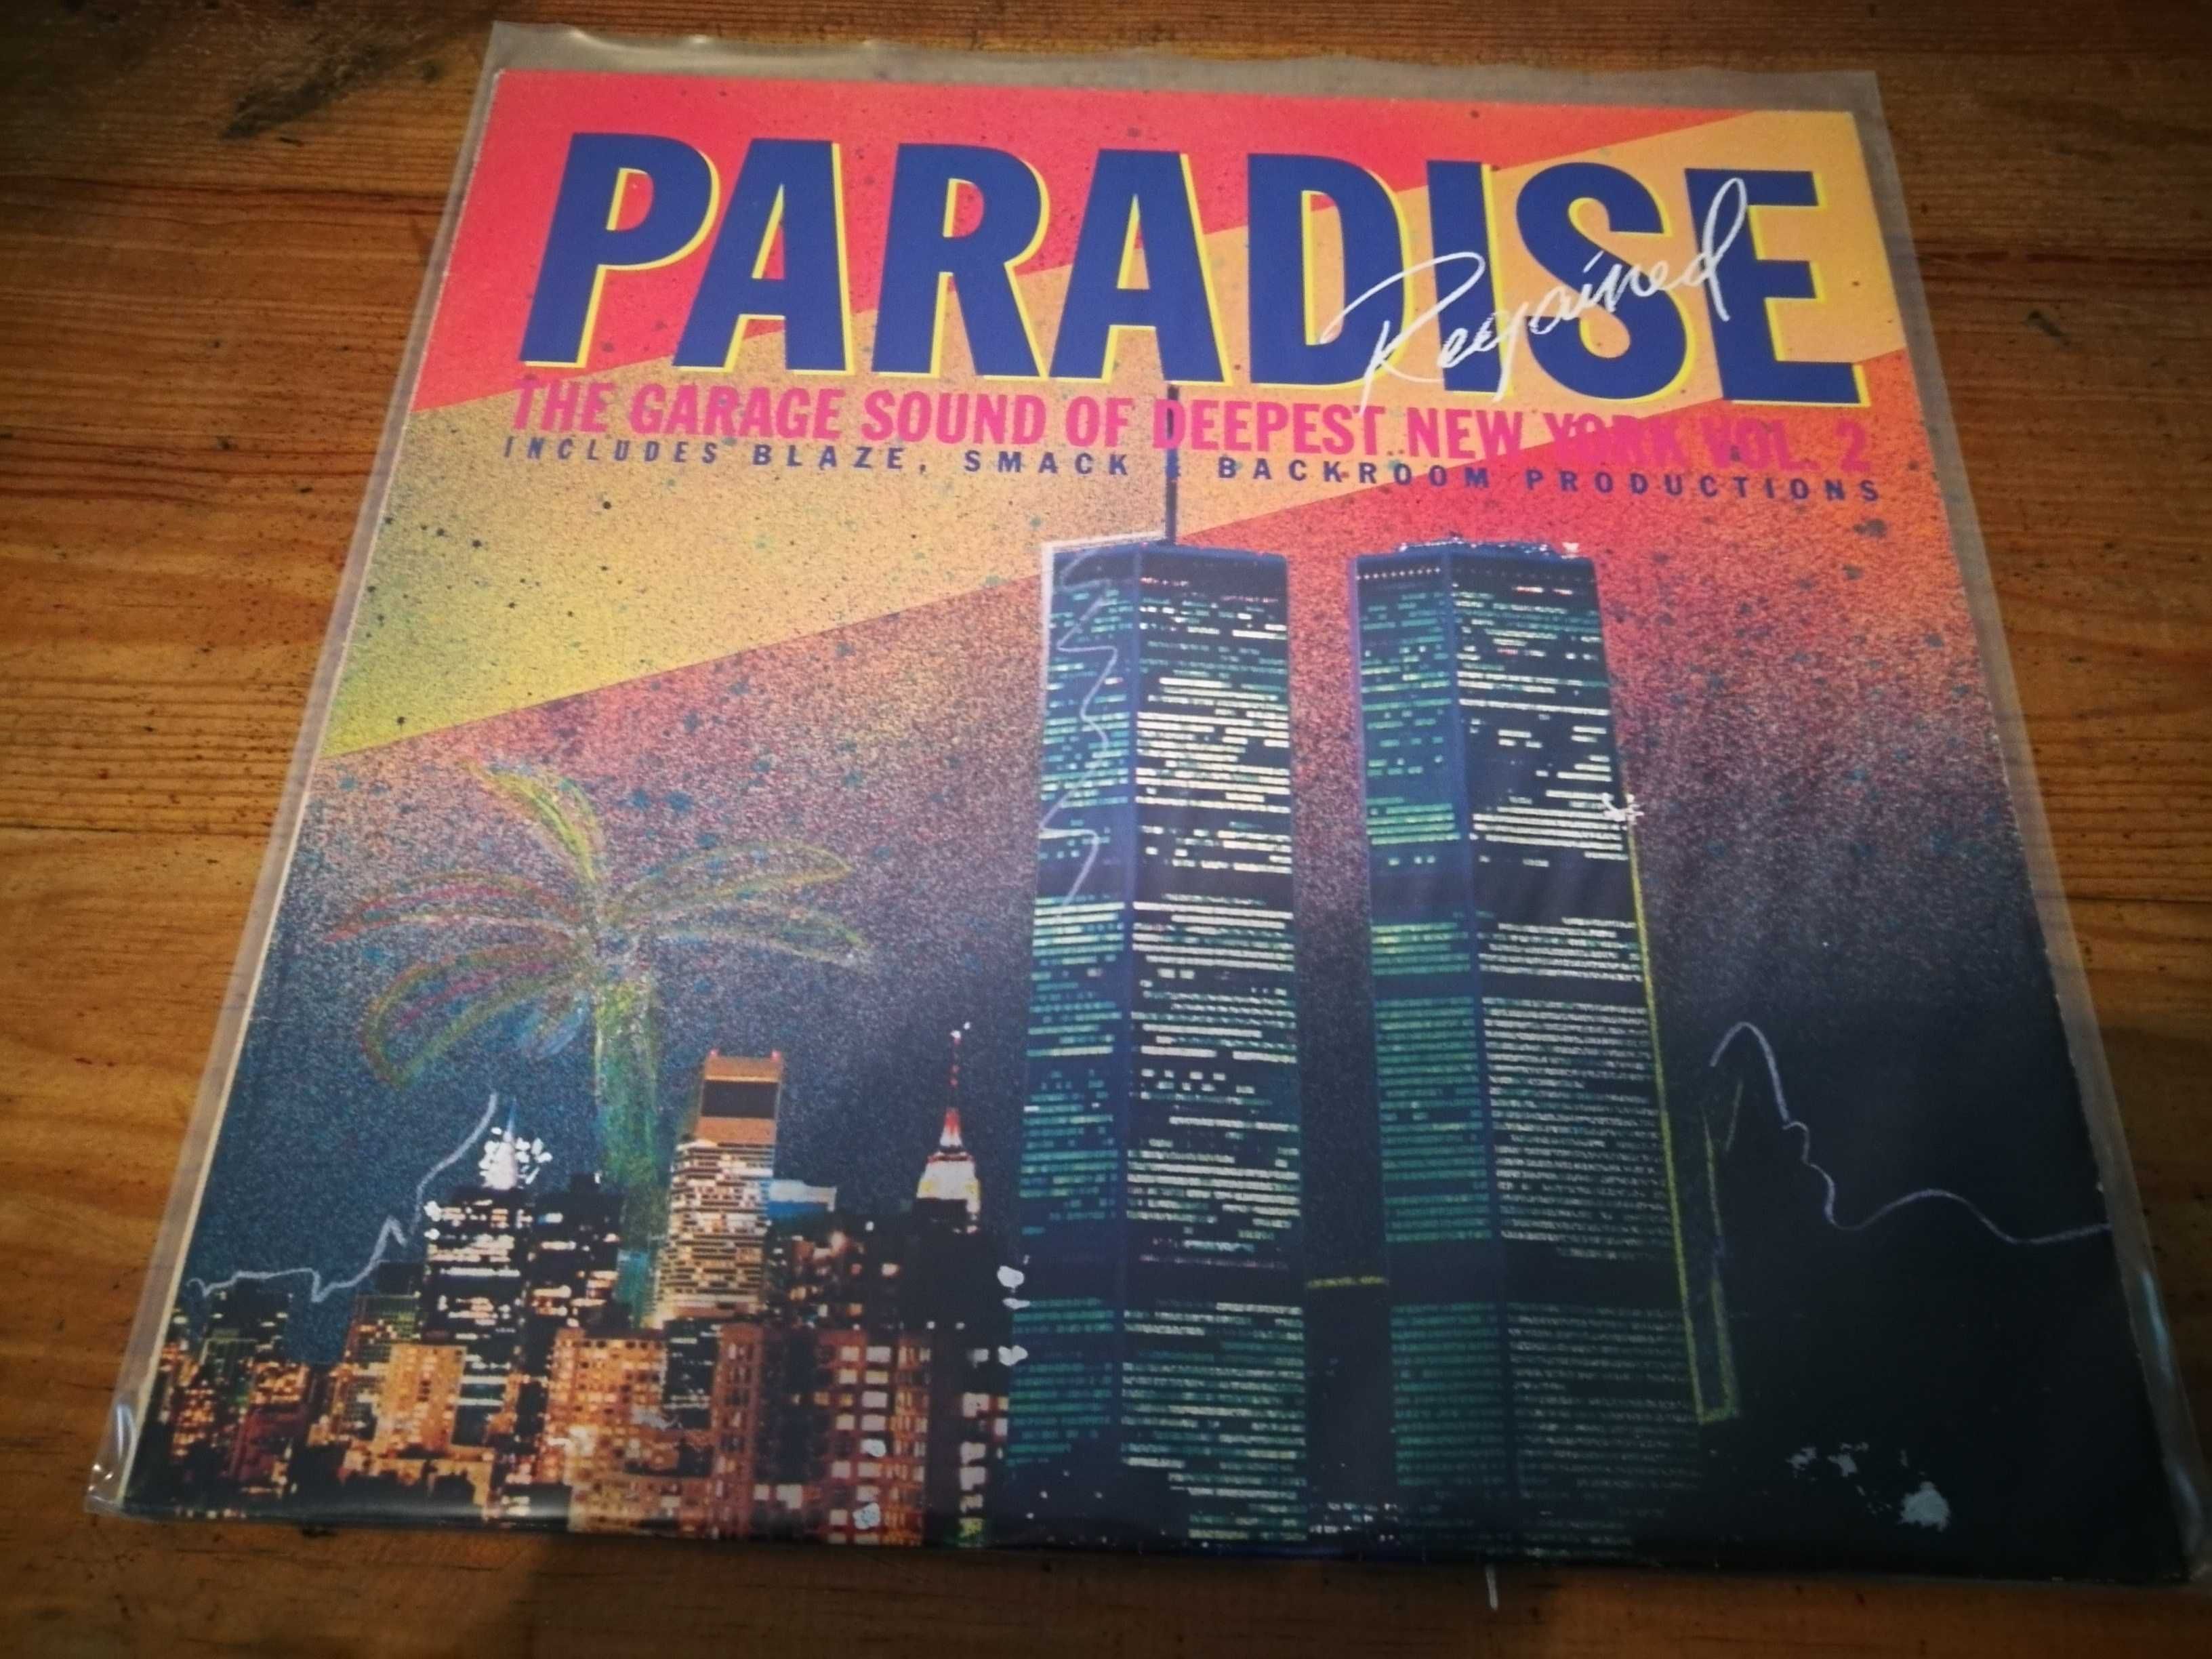 VARIOS - Paradise Regained The Garage Sound Of Deepest New YorkVOL2 LP